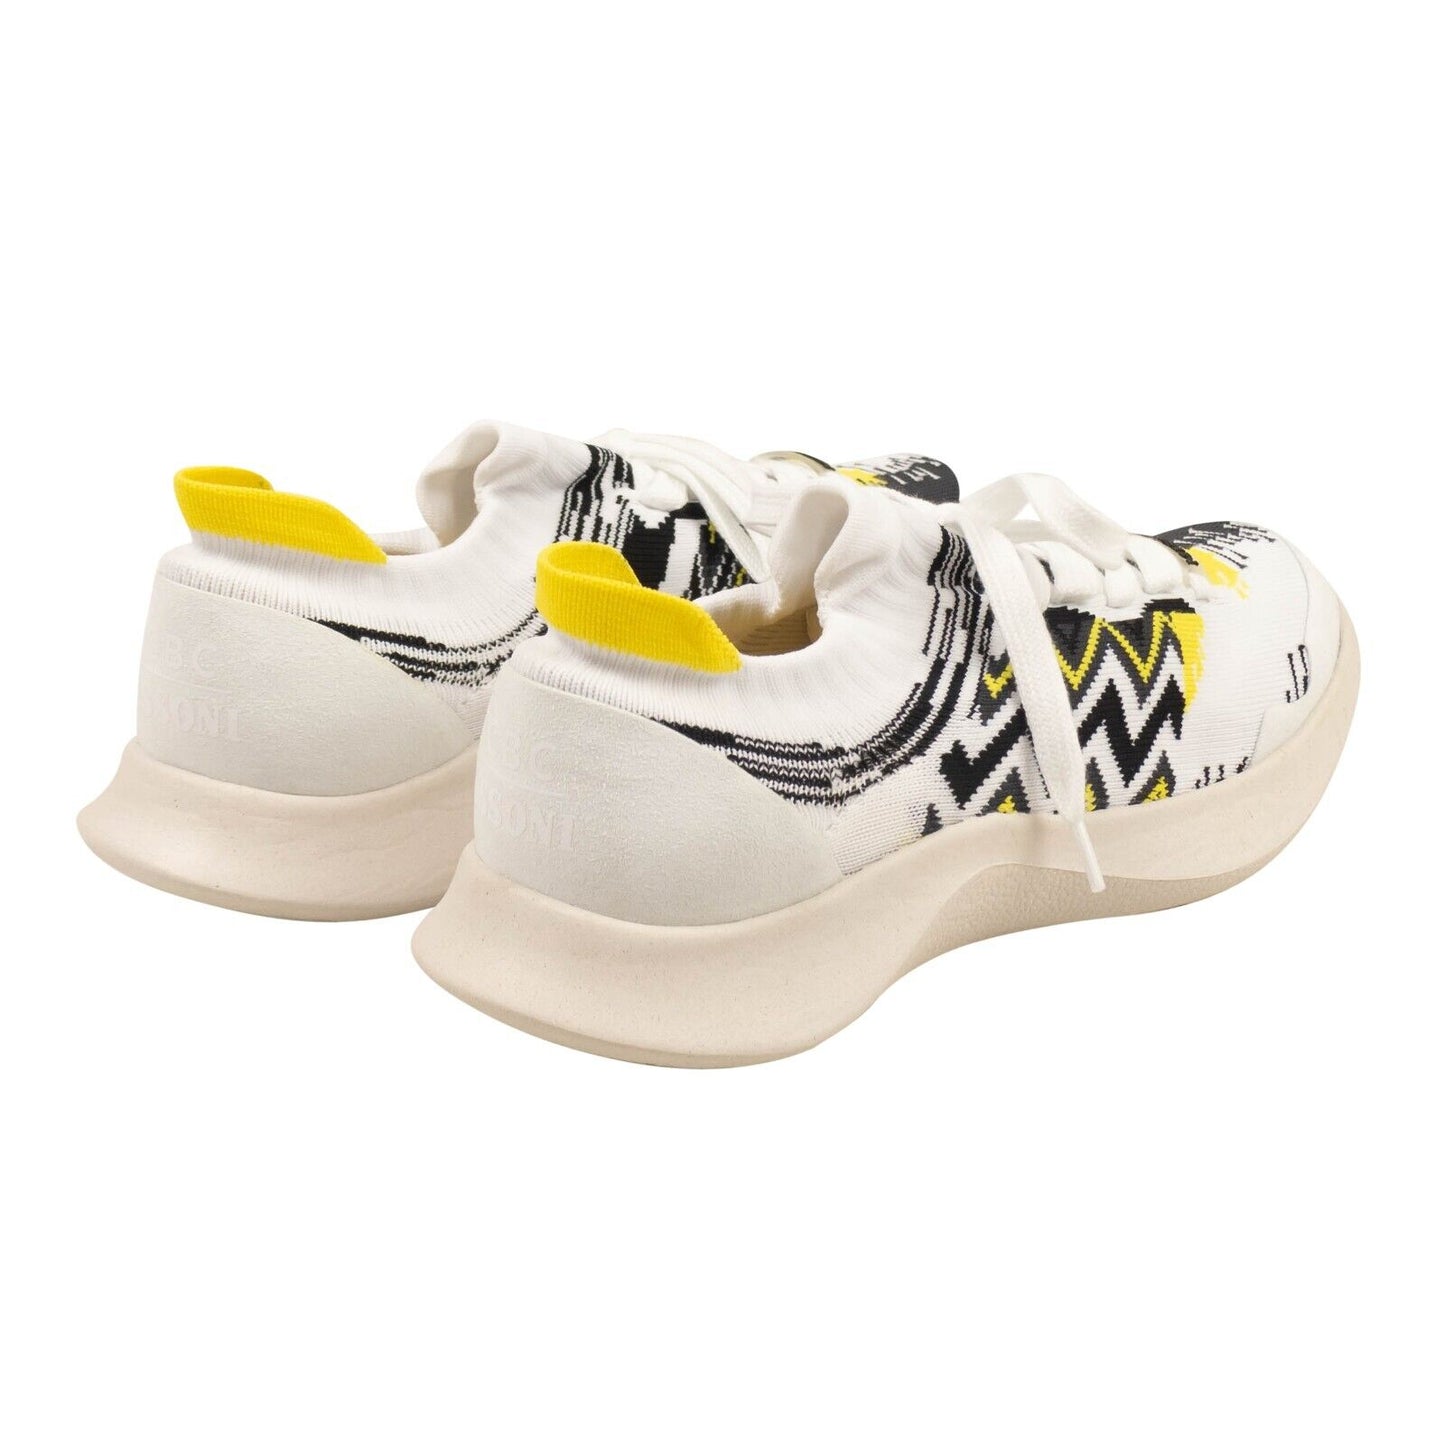 Missoni Acbc"" Fly Knit Sneakers - White/Black